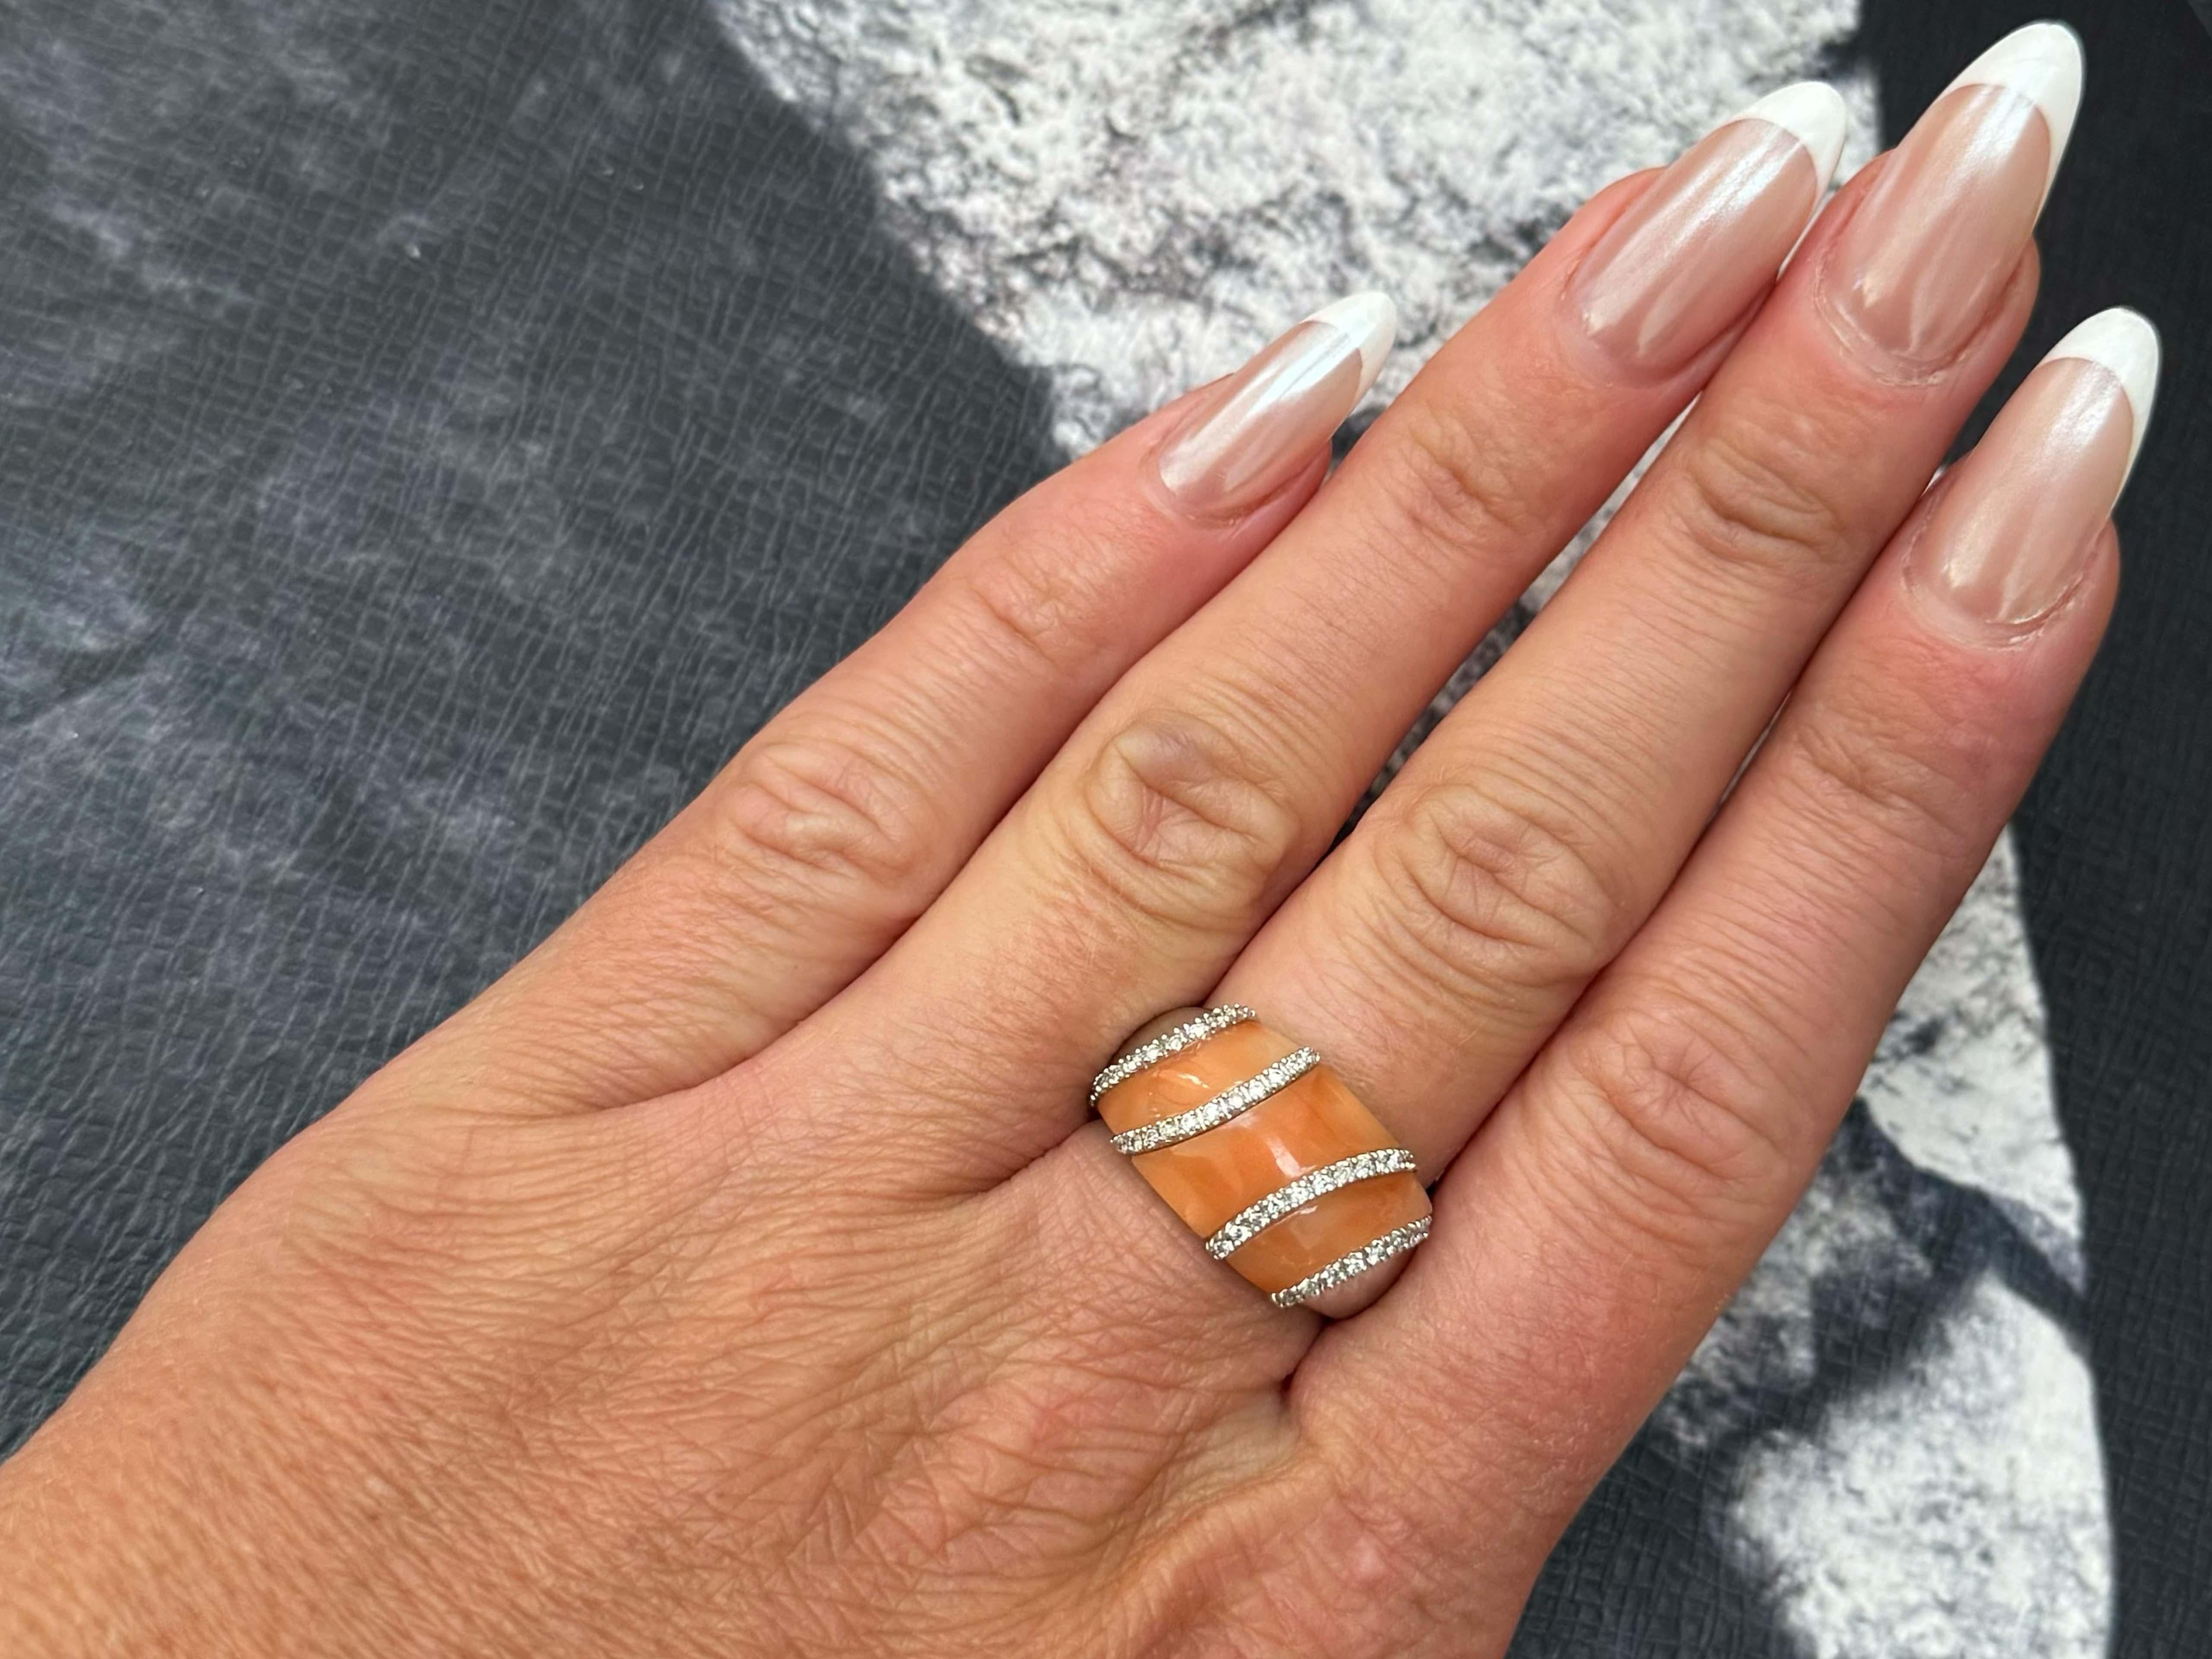 Item Specifications:

Metal: 14K White Gold

Style: Statement Ring

Ring Size: 7 (resizing available for a fee)

Total Weight: 5.8 Grams
​
​Gemstone: Angelskin Coral

Ring Height: 12.5 mm

Diamond Count: 40 round brilliant cut 

Diamond Color: